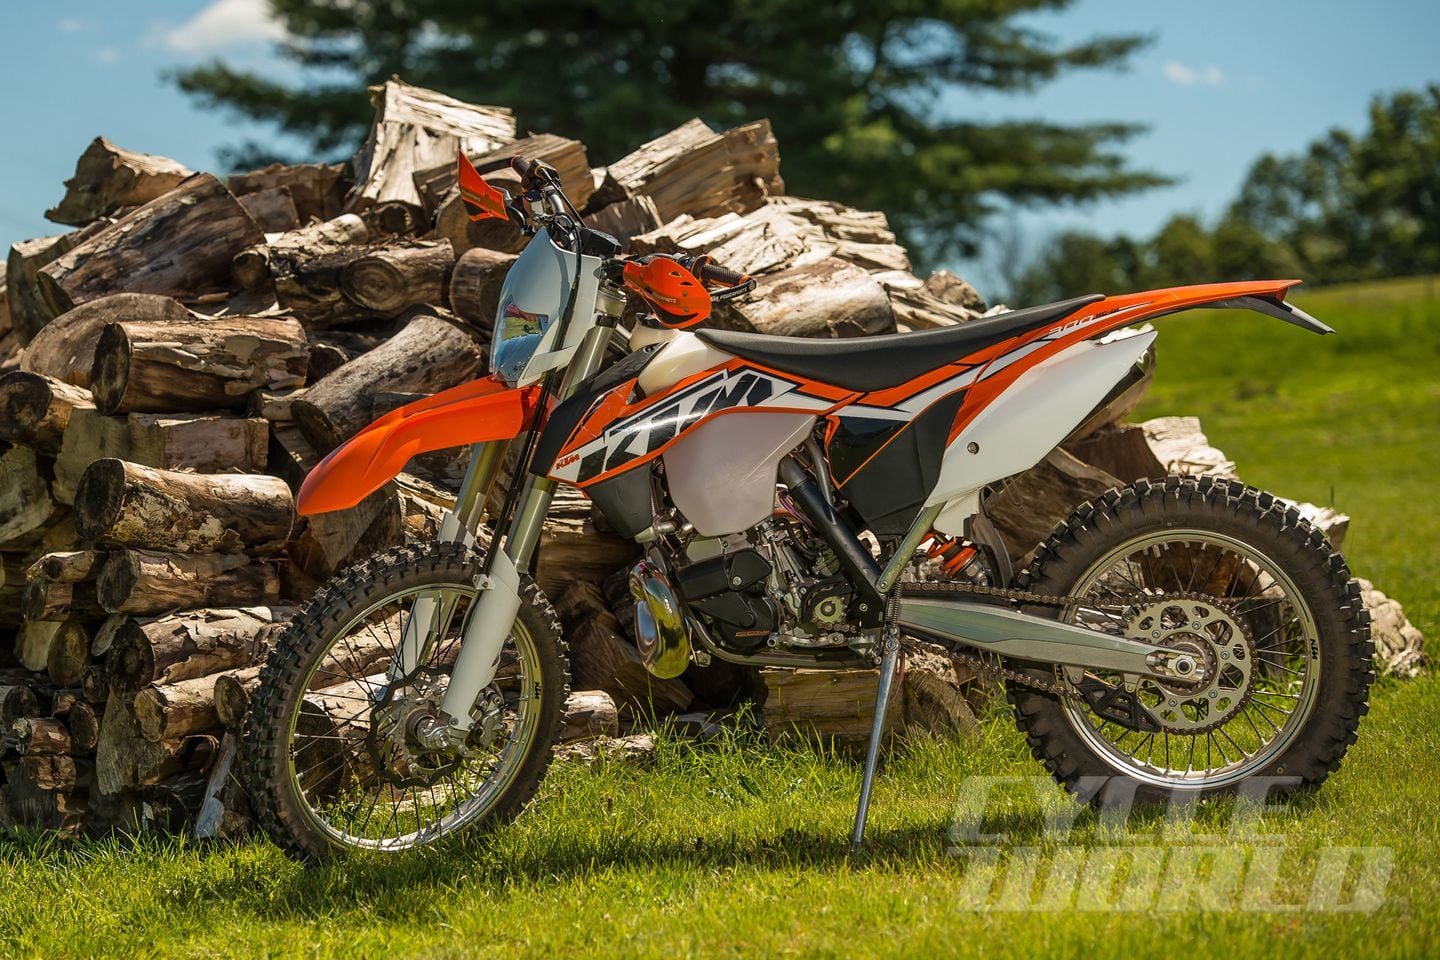 On the scales ⚖️  KTM 250 EXC TPI - Weight fully fueled and ready to ride?  